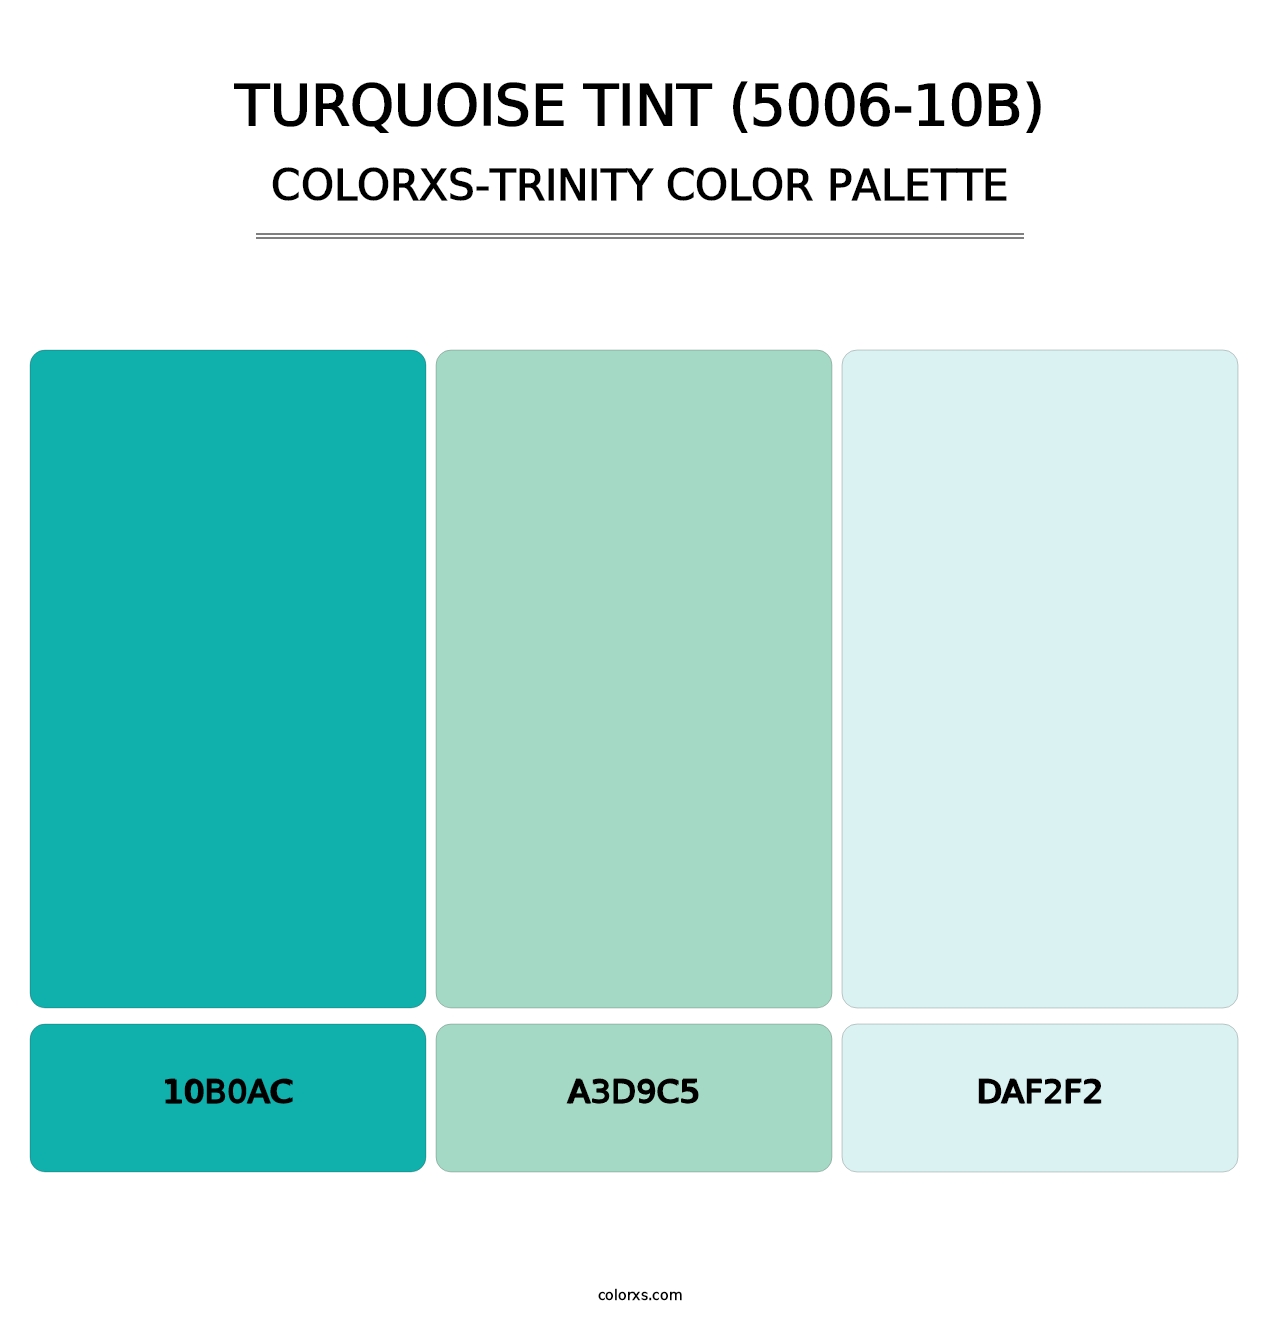 Turquoise Tint (5006-10B) - Colorxs Trinity Palette